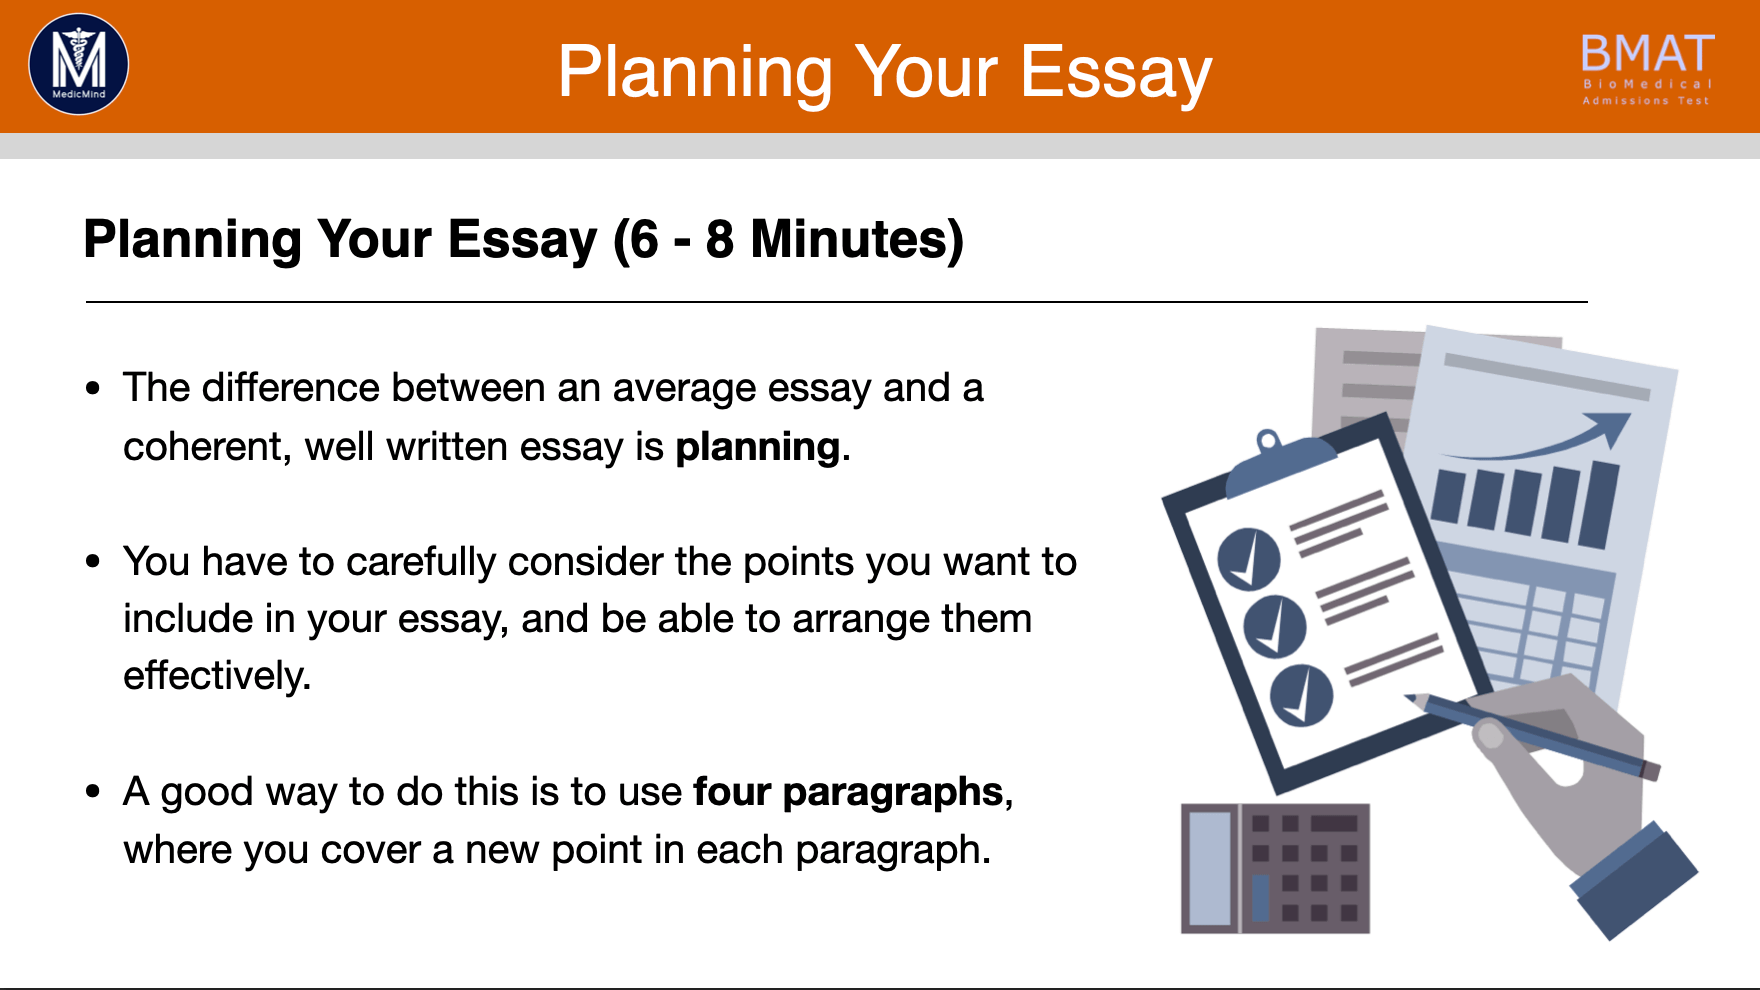 Planning Your Essay